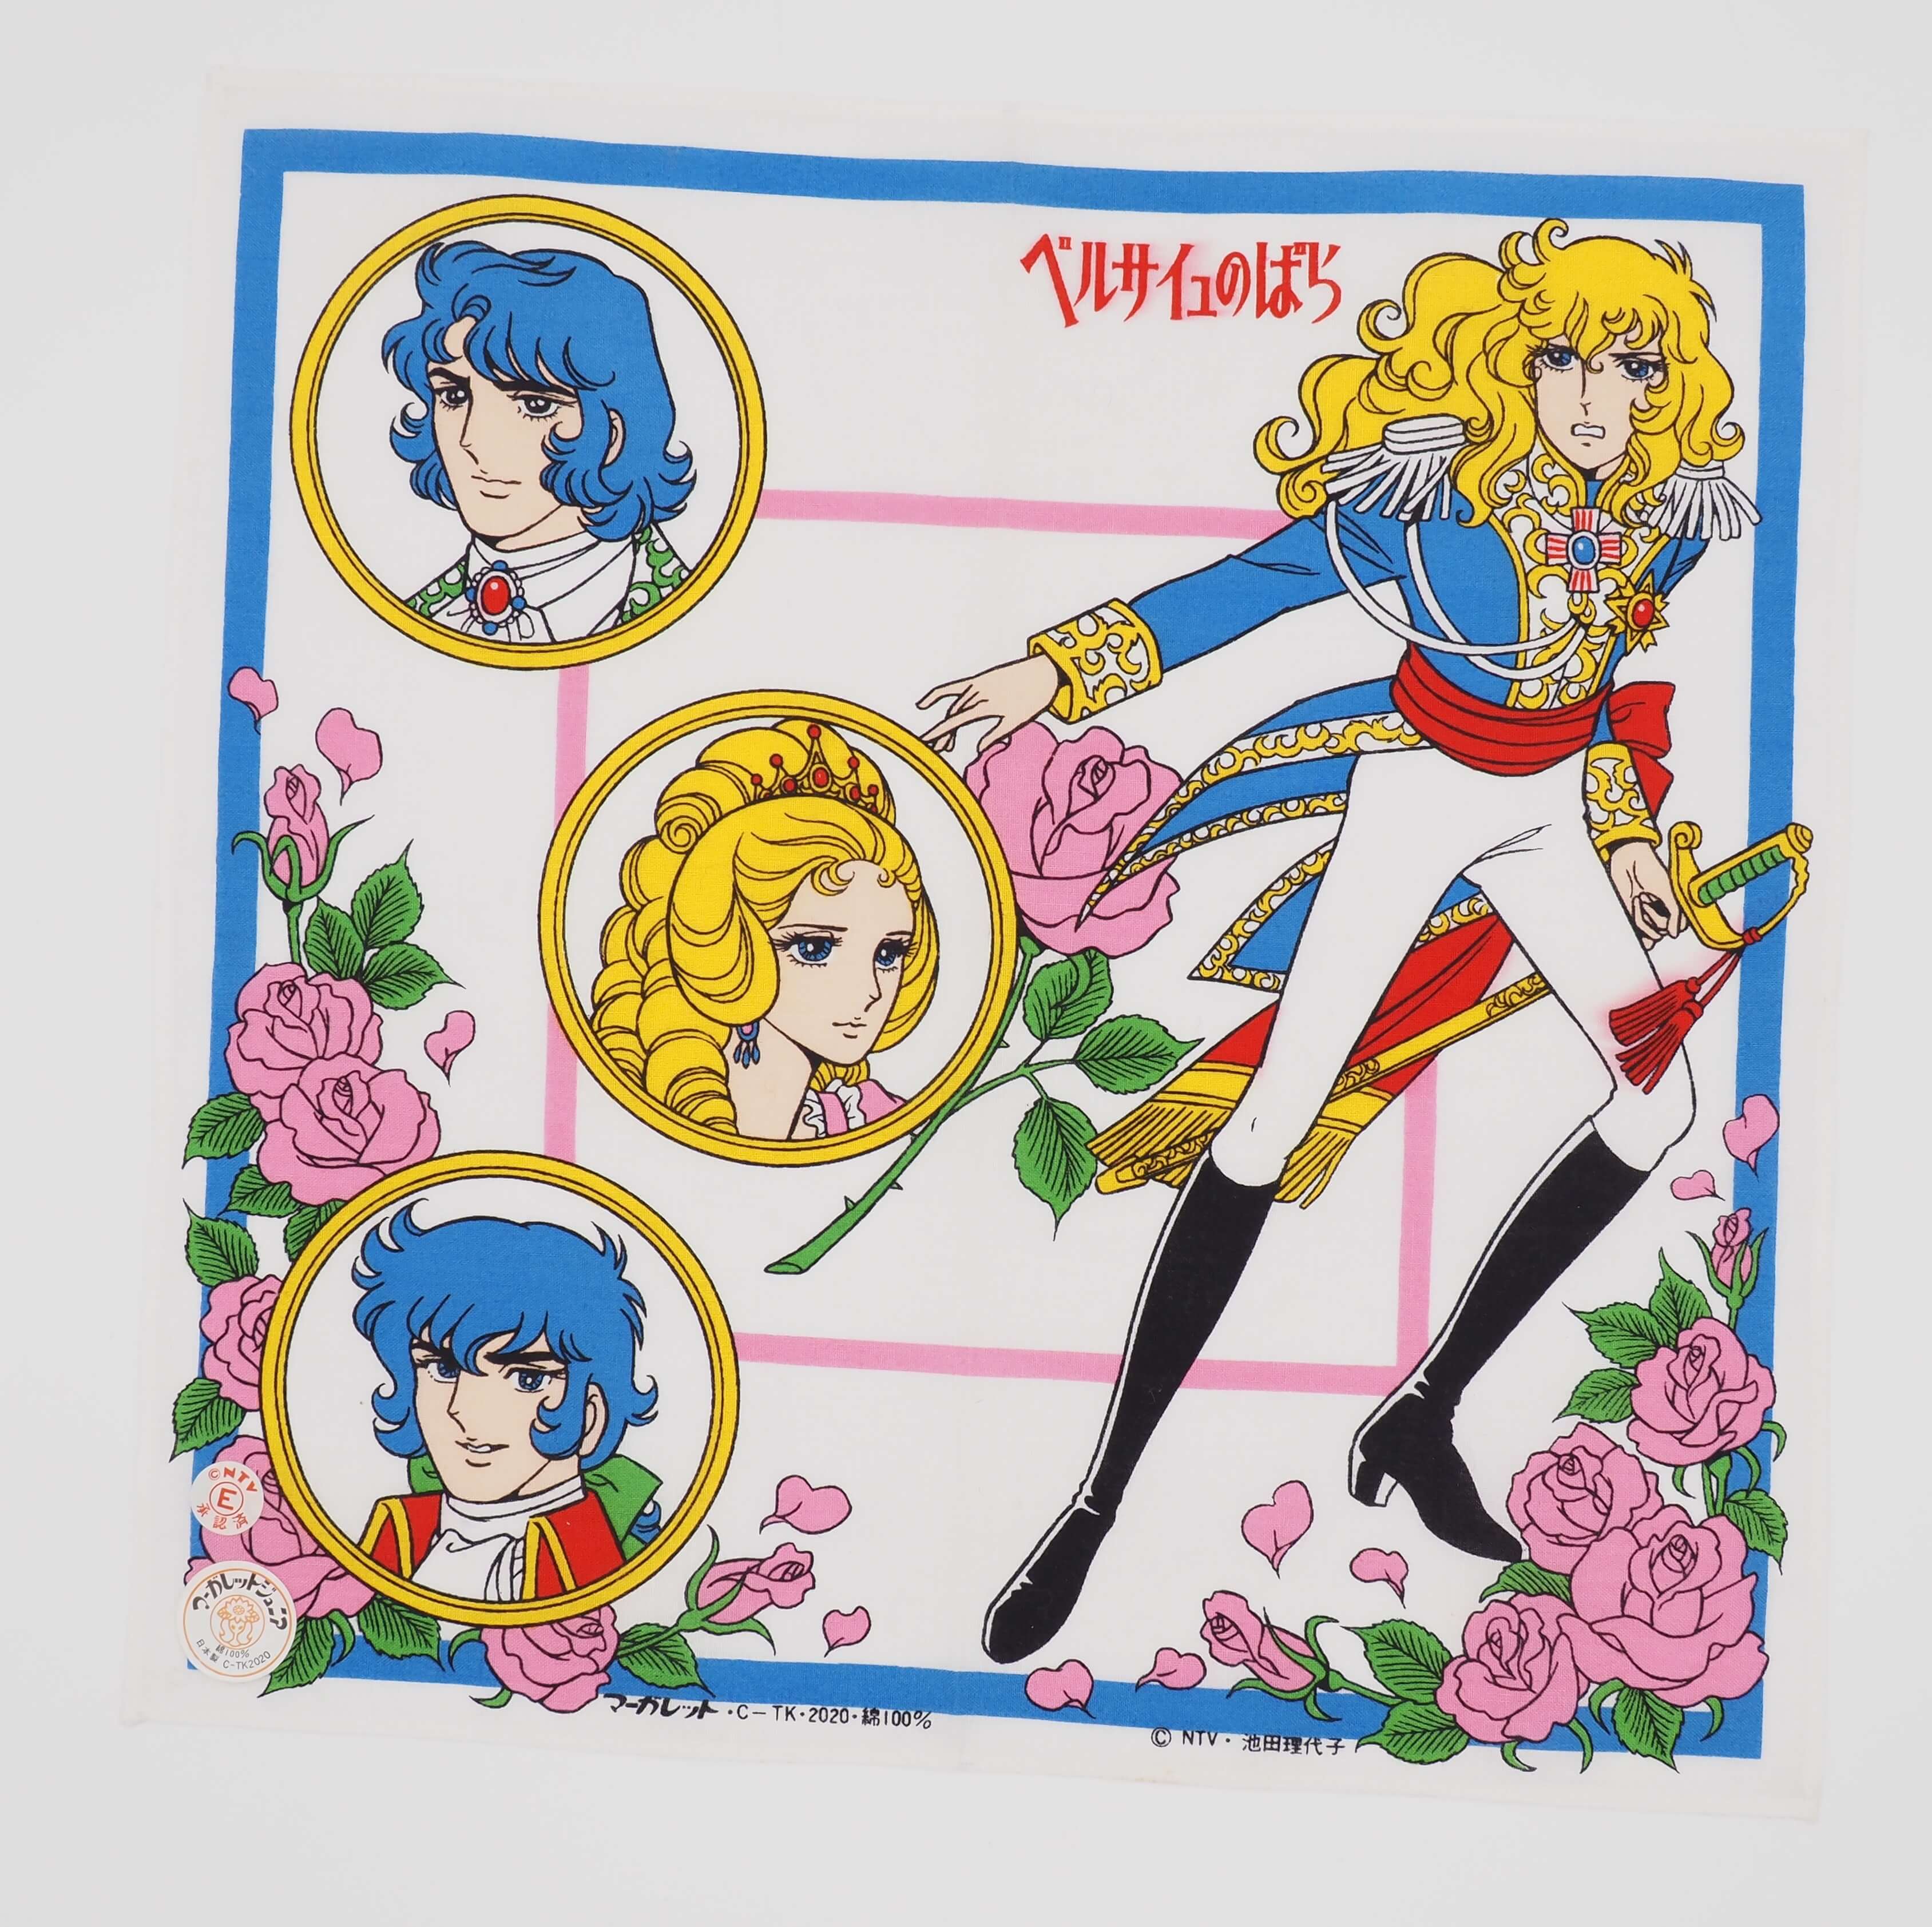 More Details about The Rose of Versailles 50th Anniversary